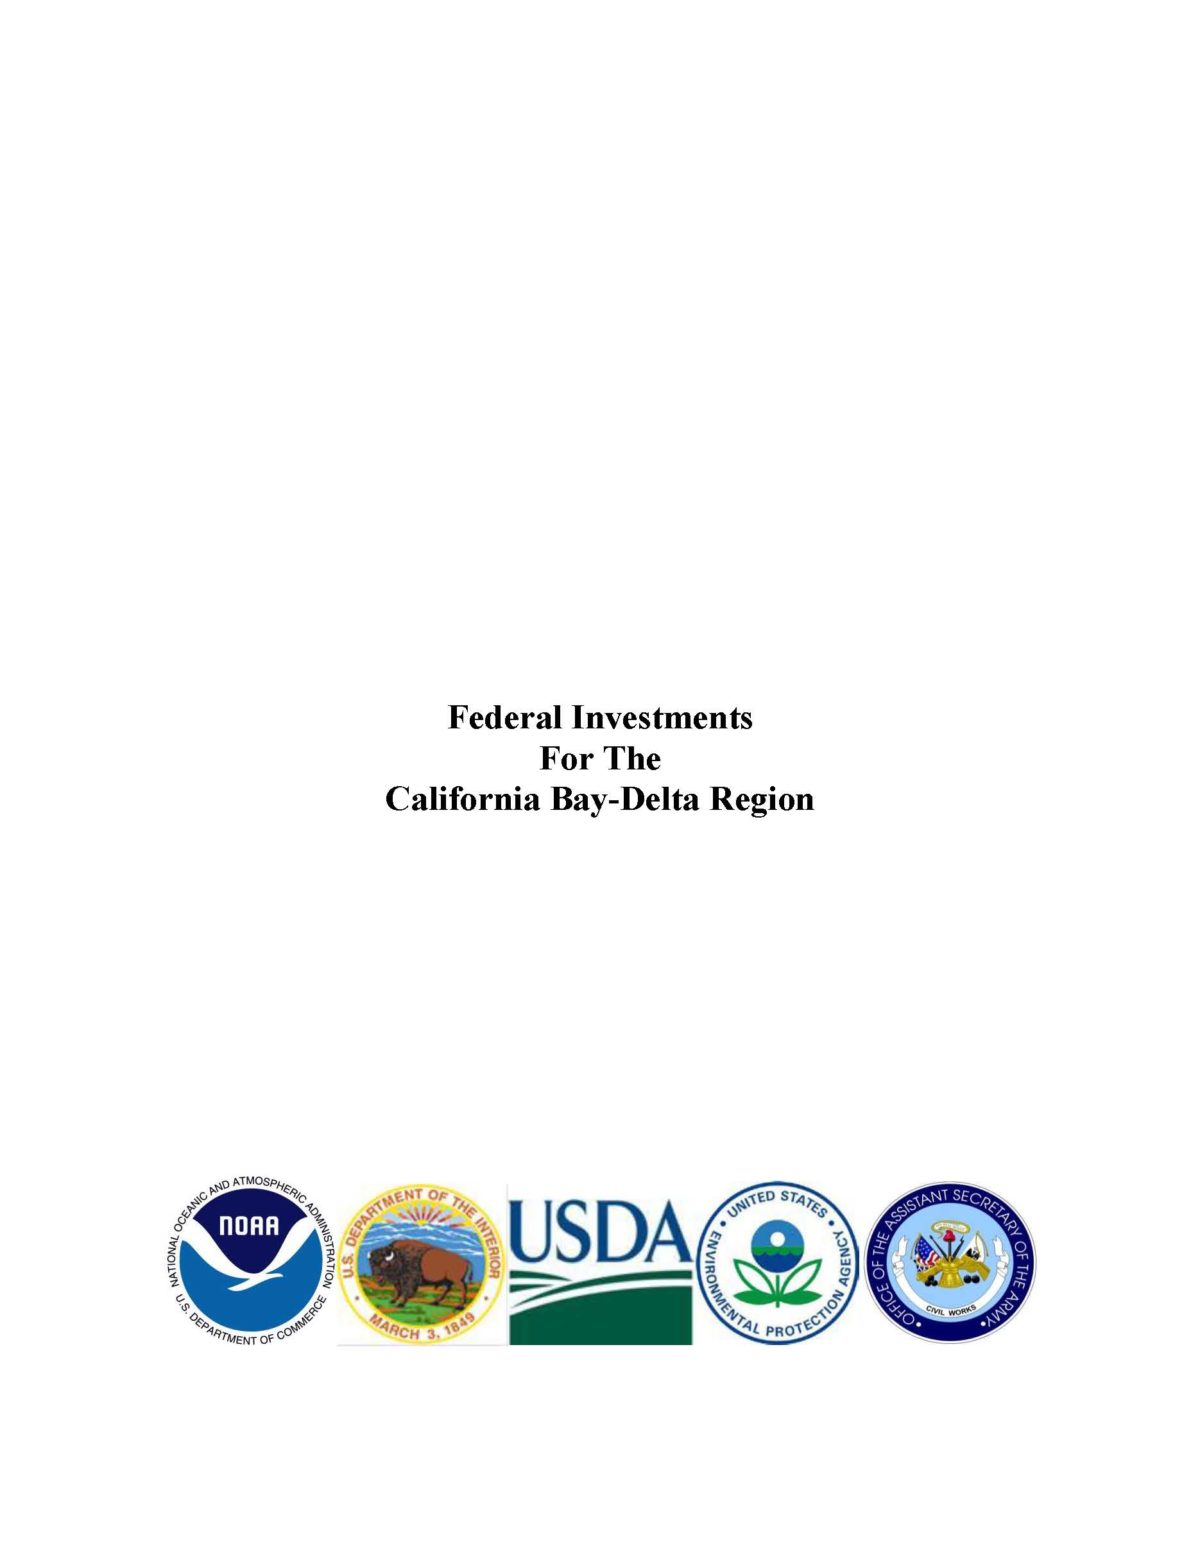 Federal Investments for the California Bay-Delta Region